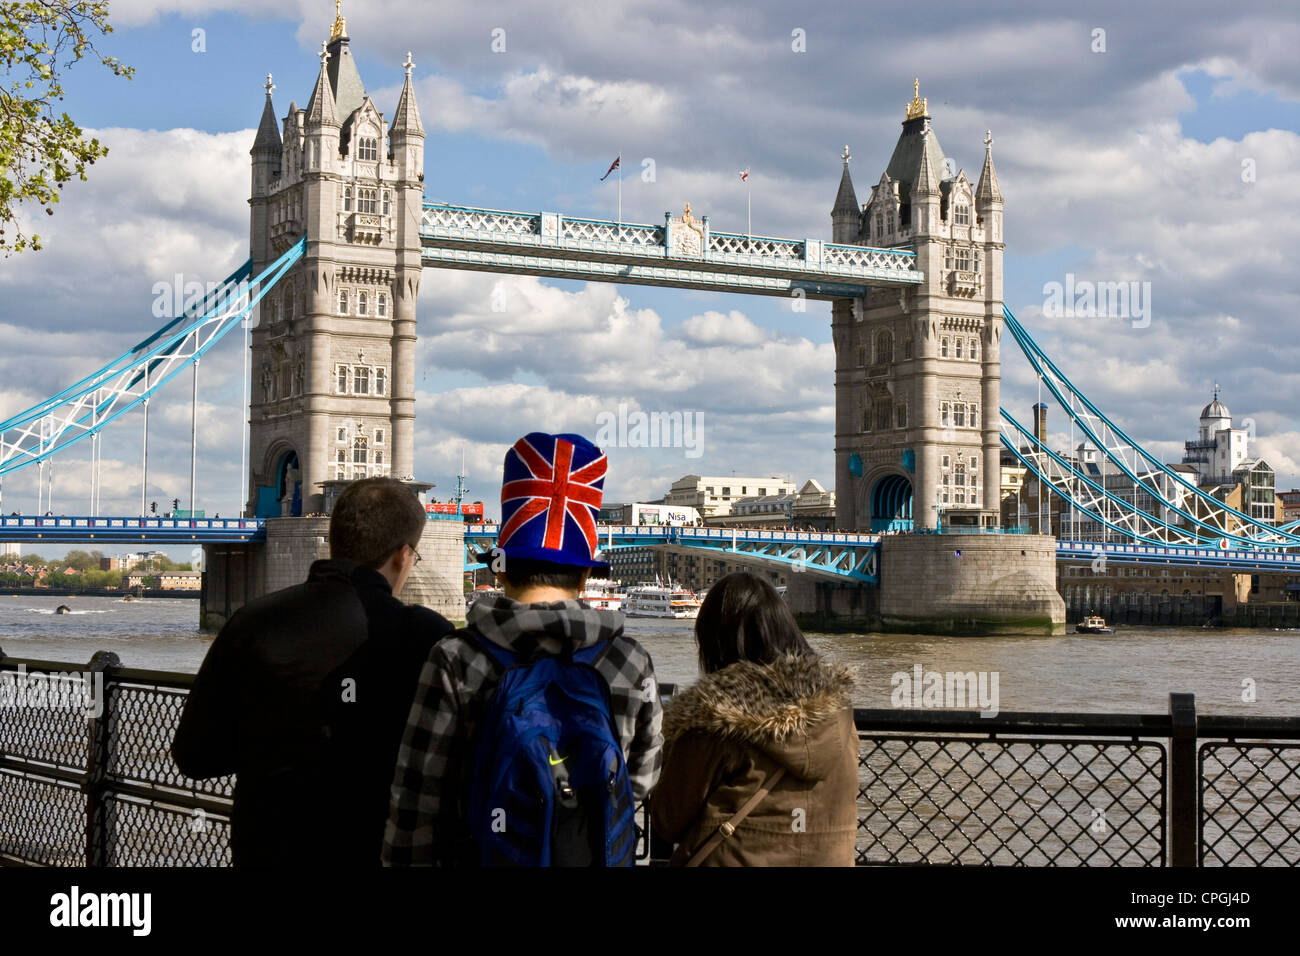 Boy holidaymaker wearing Union Jack top hat patriotic headgear looking at grade 1 listed Tower Bridge London England Europe Stock Photo